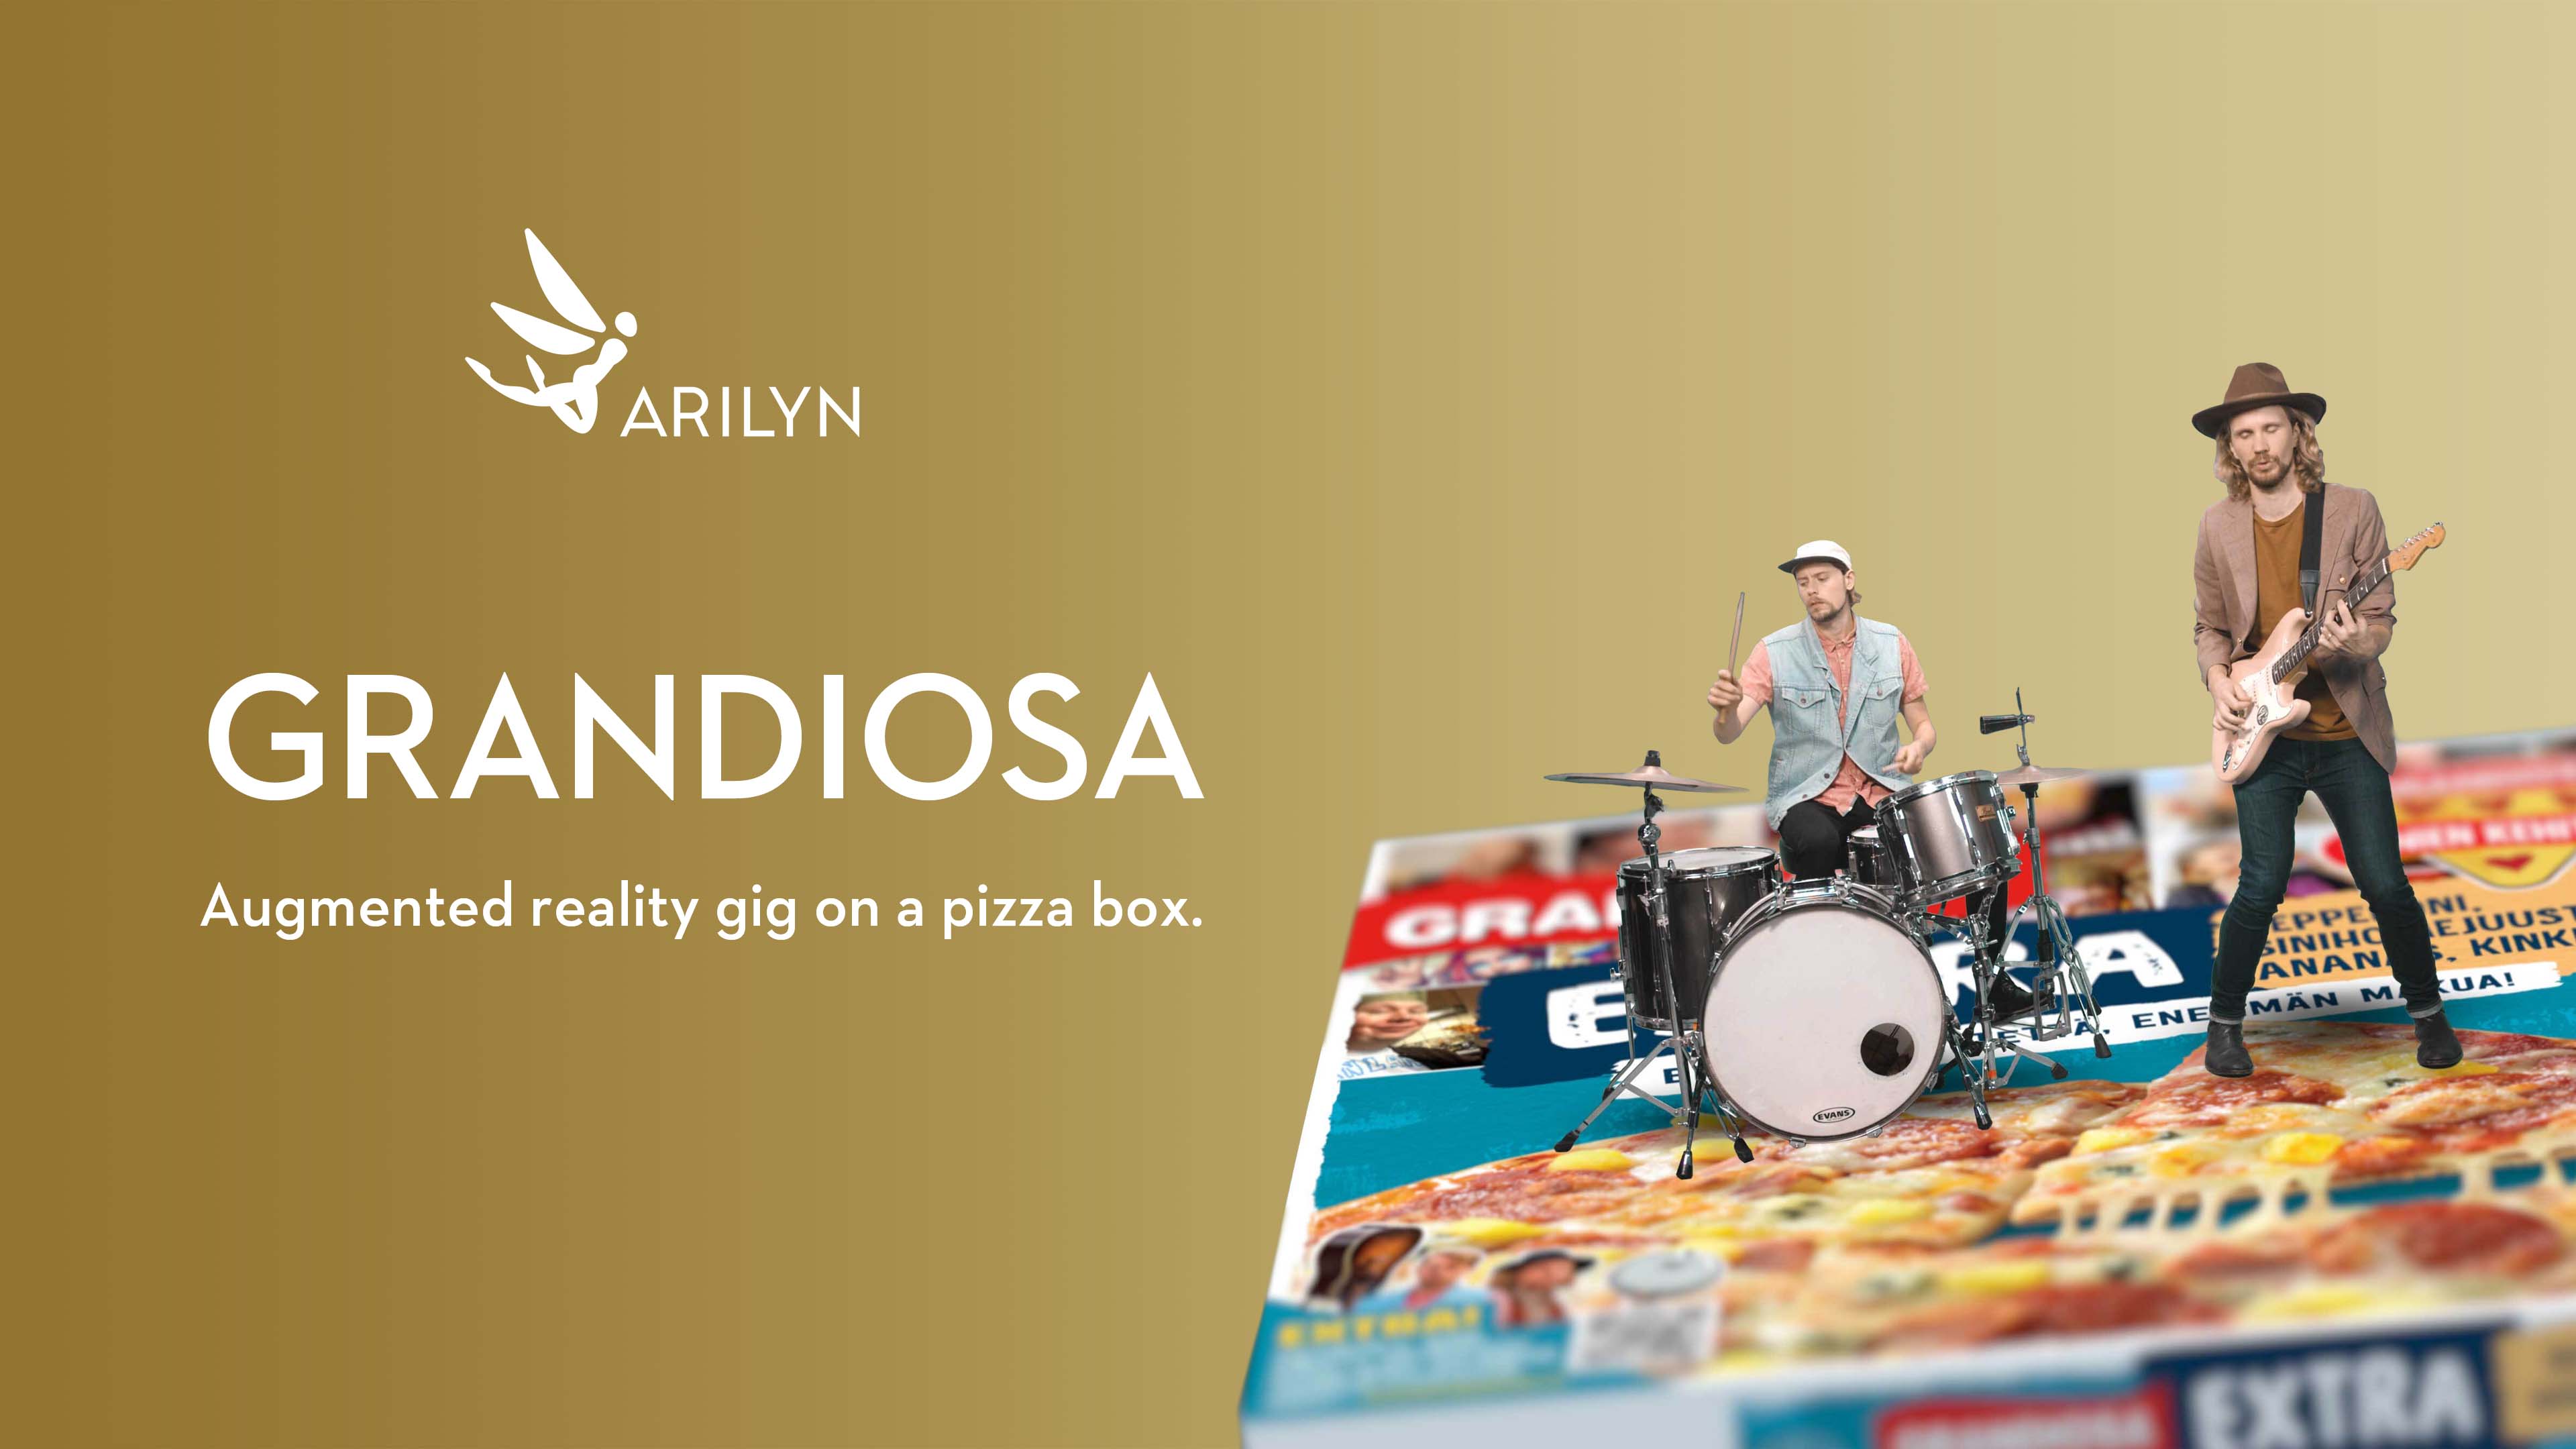 Grandiosa's new fan pizza launched with an augmented reality gig